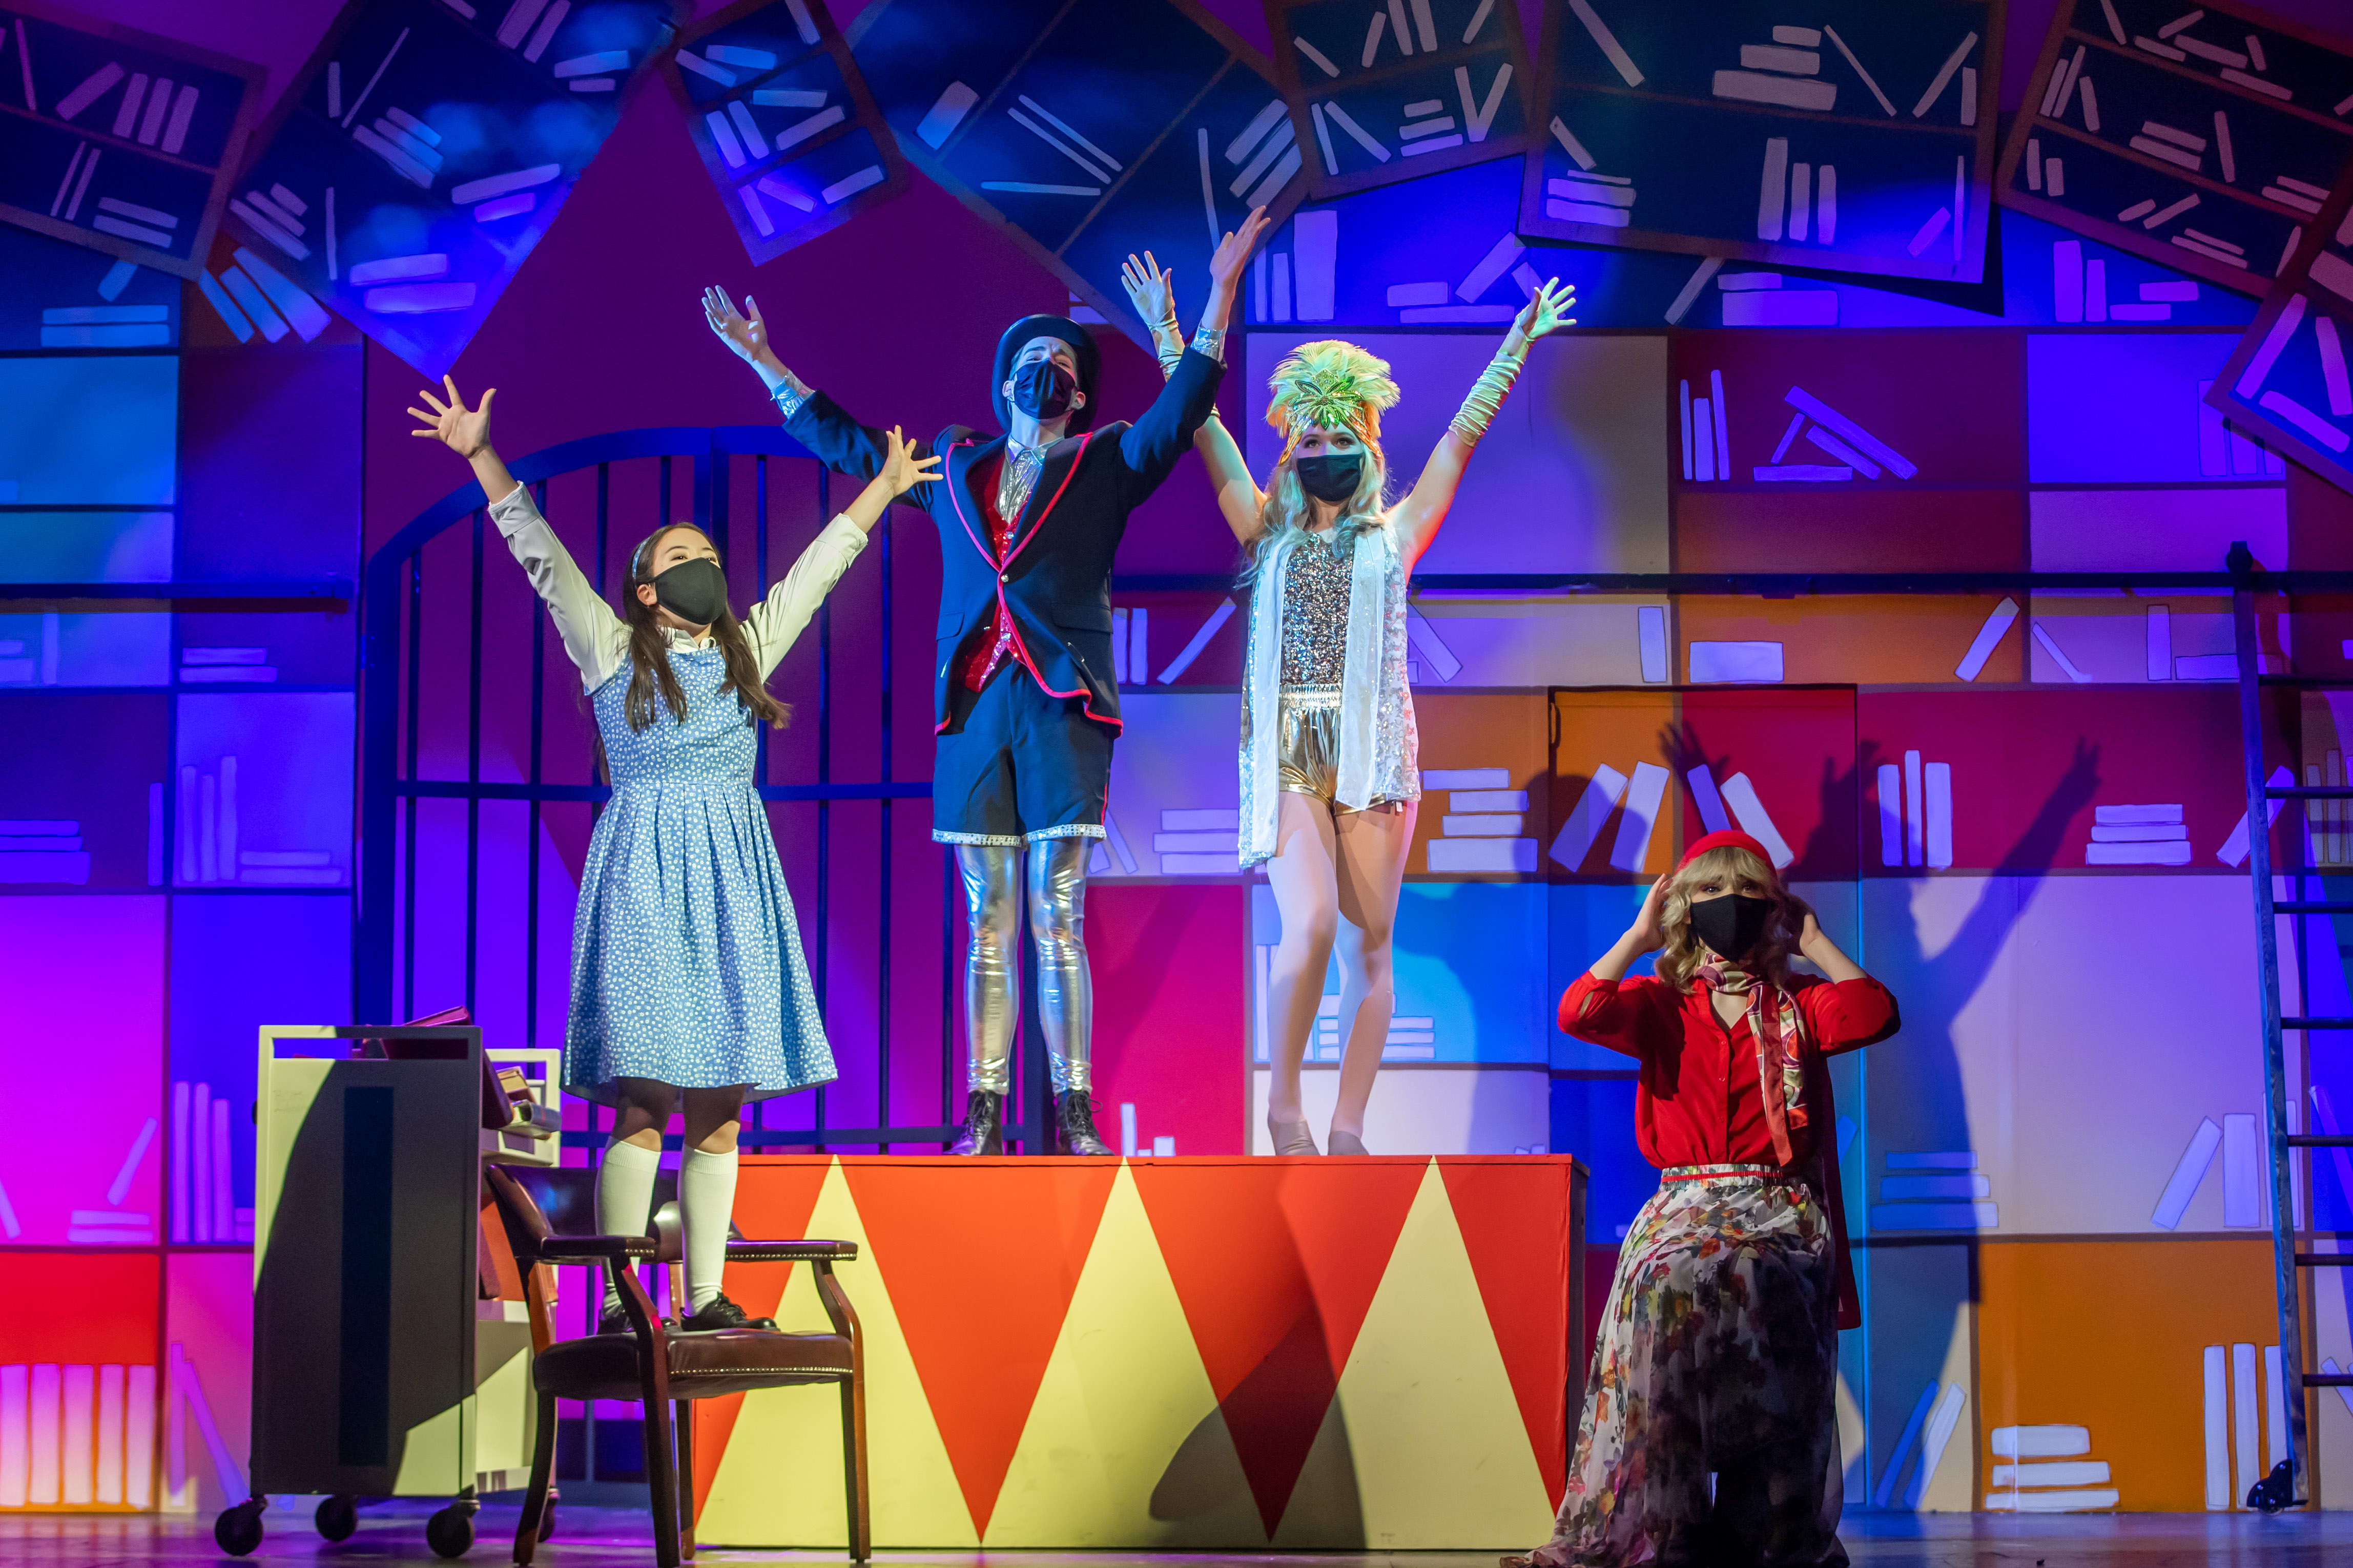 Matilda telling the story of the Escapologist and the Acrobat to the librarian.
Matilda Wormwood - Olivia C Cheng
Escapologist - West Sepko
Acrobat - Elle Connell
Mrs. Phelps (librarian) - Isabelle Johnson